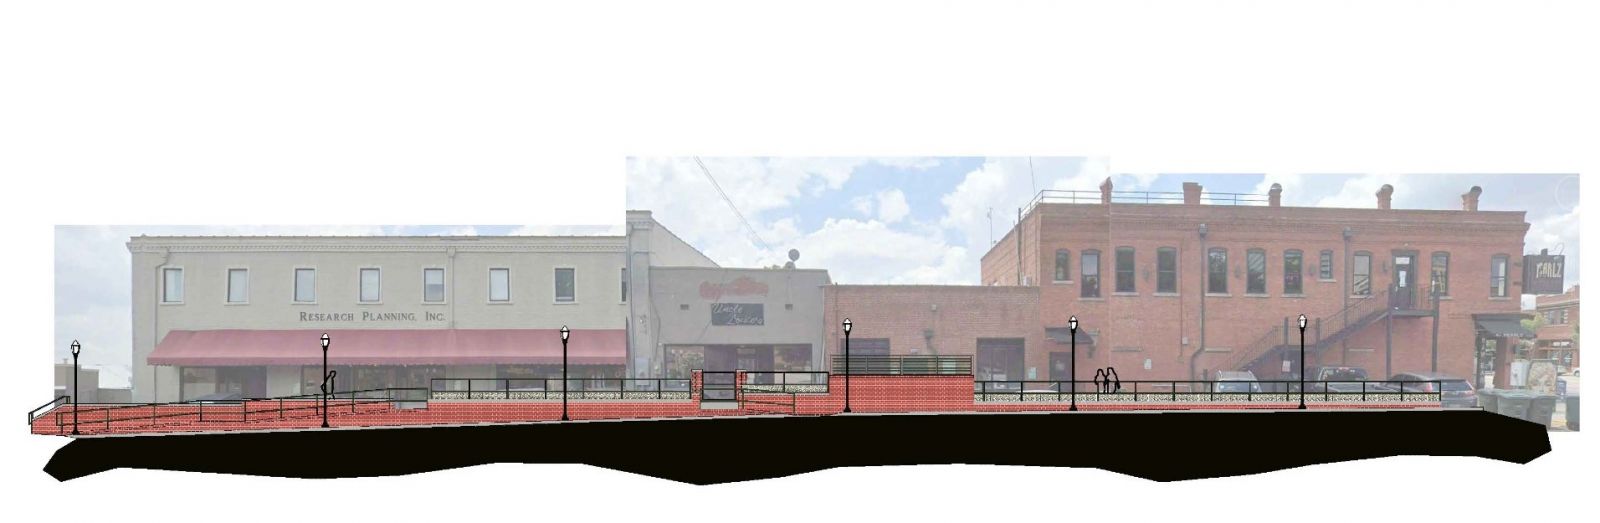 A Vista beautification project is adding lighting, landscaping, sidewalks and outdoor seating to Park Street between Gervais and Senate streets. (Rendering/Provided)